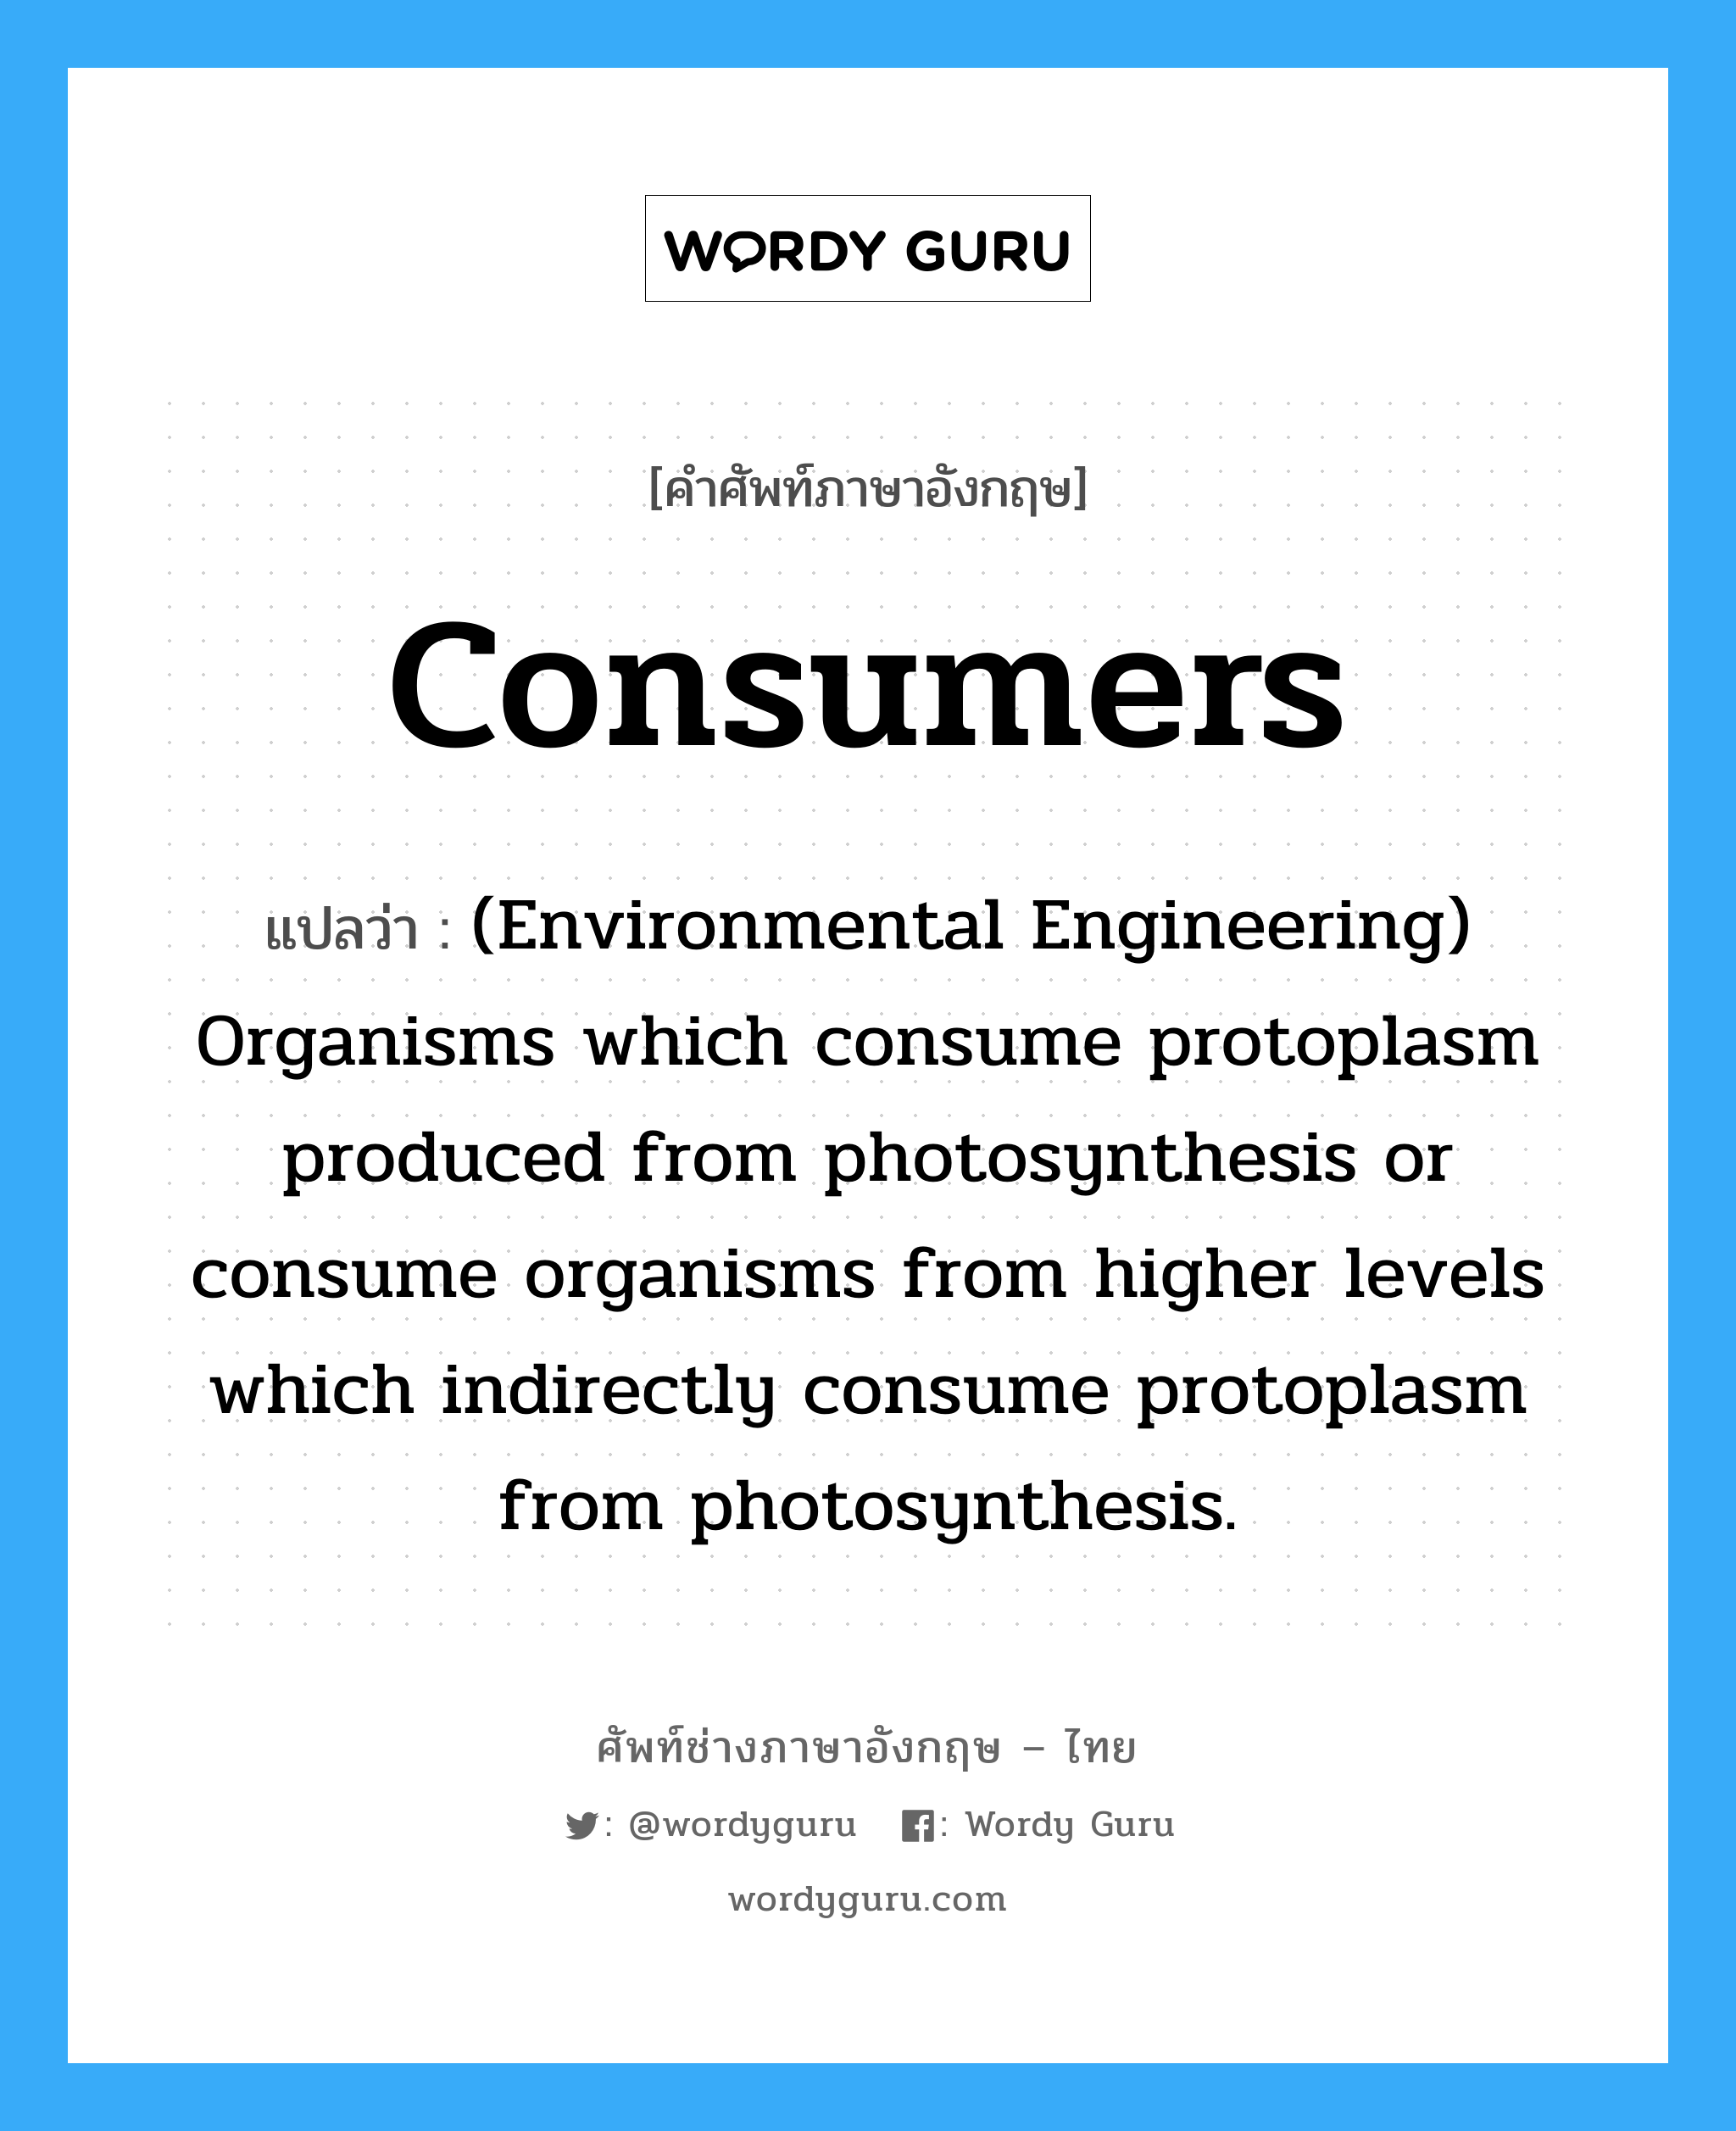 Consumers แปลว่า?, คำศัพท์ช่างภาษาอังกฤษ - ไทย Consumers คำศัพท์ภาษาอังกฤษ Consumers แปลว่า (Environmental Engineering) Organisms which consume protoplasm produced from photosynthesis or consume organisms from higher levels which indirectly consume protoplasm from photosynthesis.